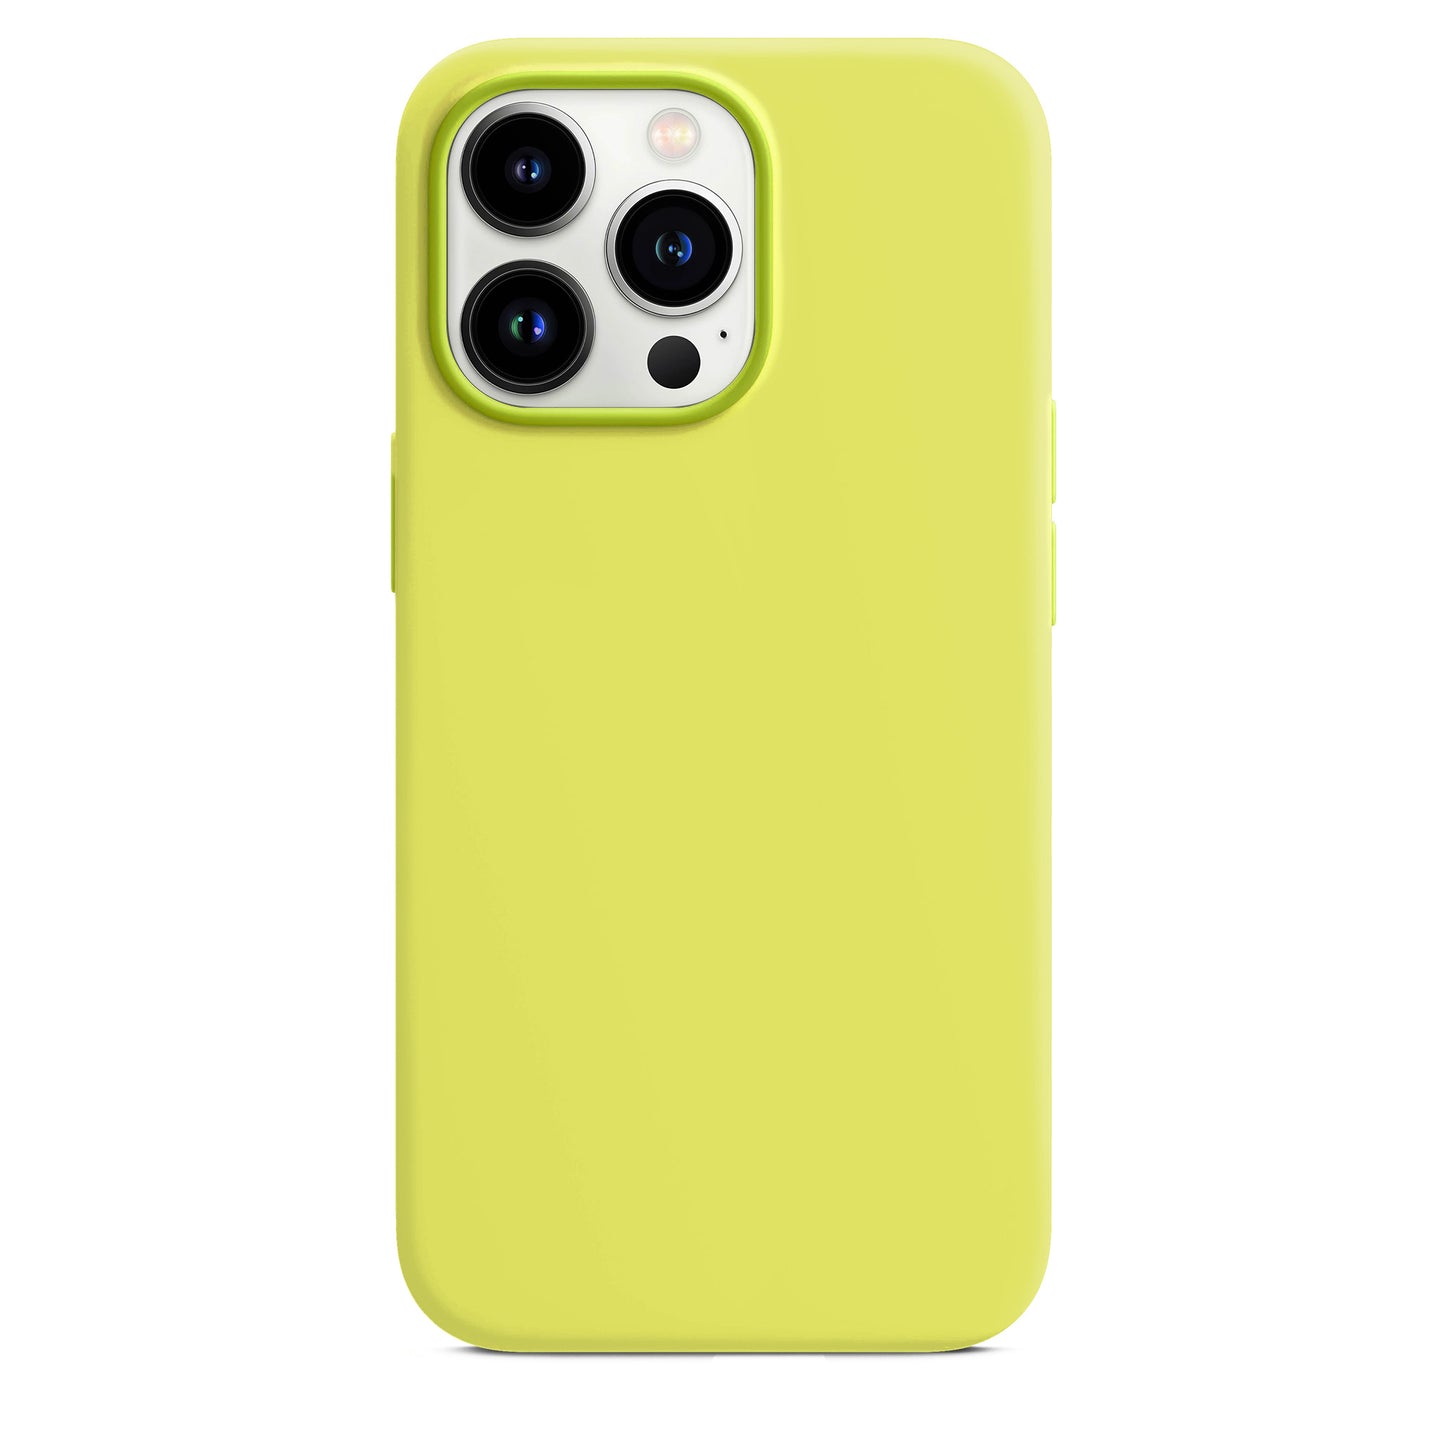 Lemon Zest Silicone Case for iPhone